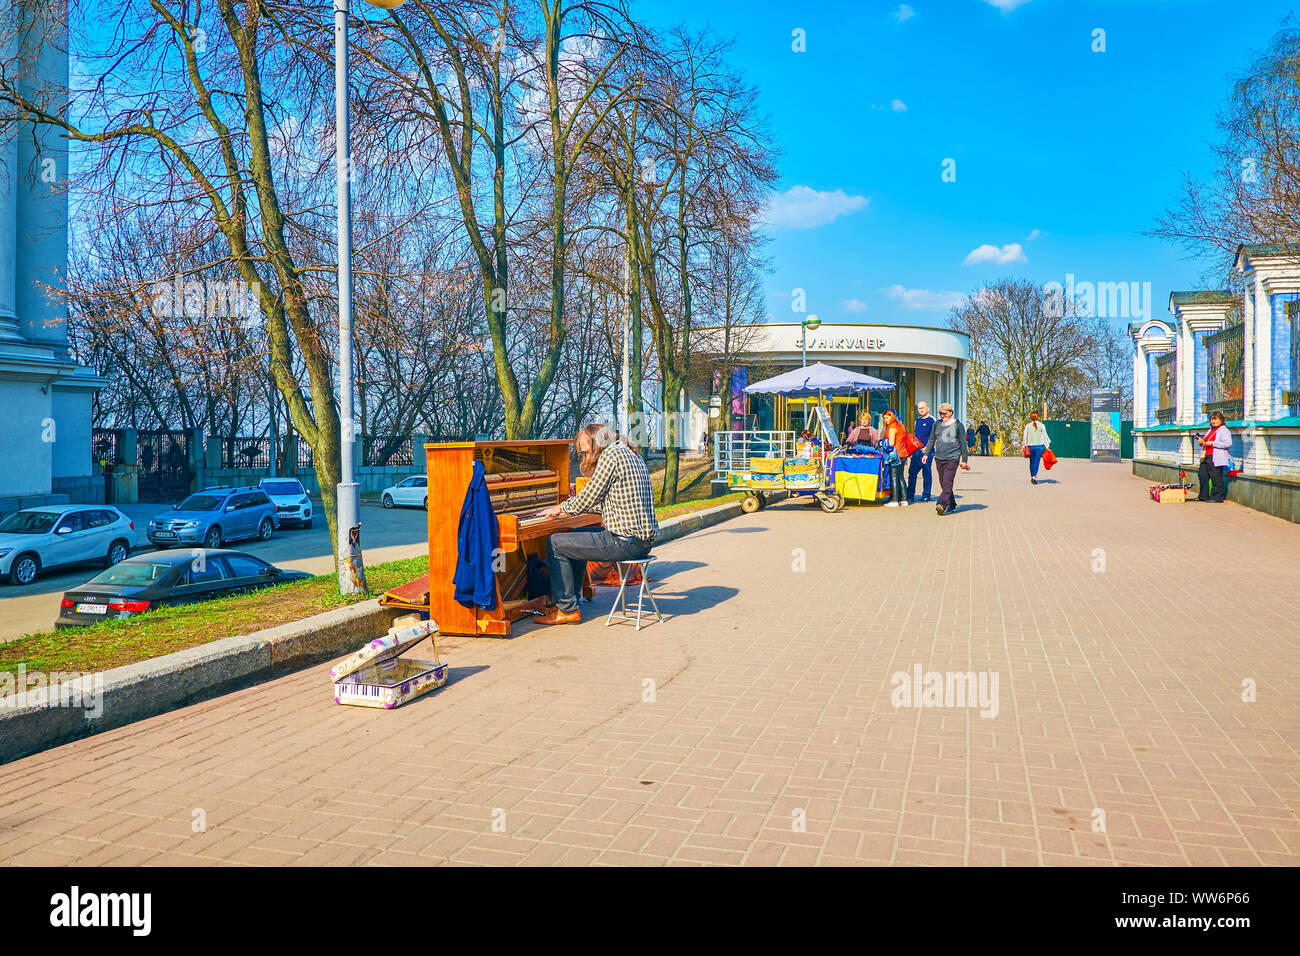 KIEV, UKRAINE - APRIL 13, 2018: The street musician plays piano in park, located on Saint Vladimir's Hill next to the upper funicular station, on Apri Stock Photo